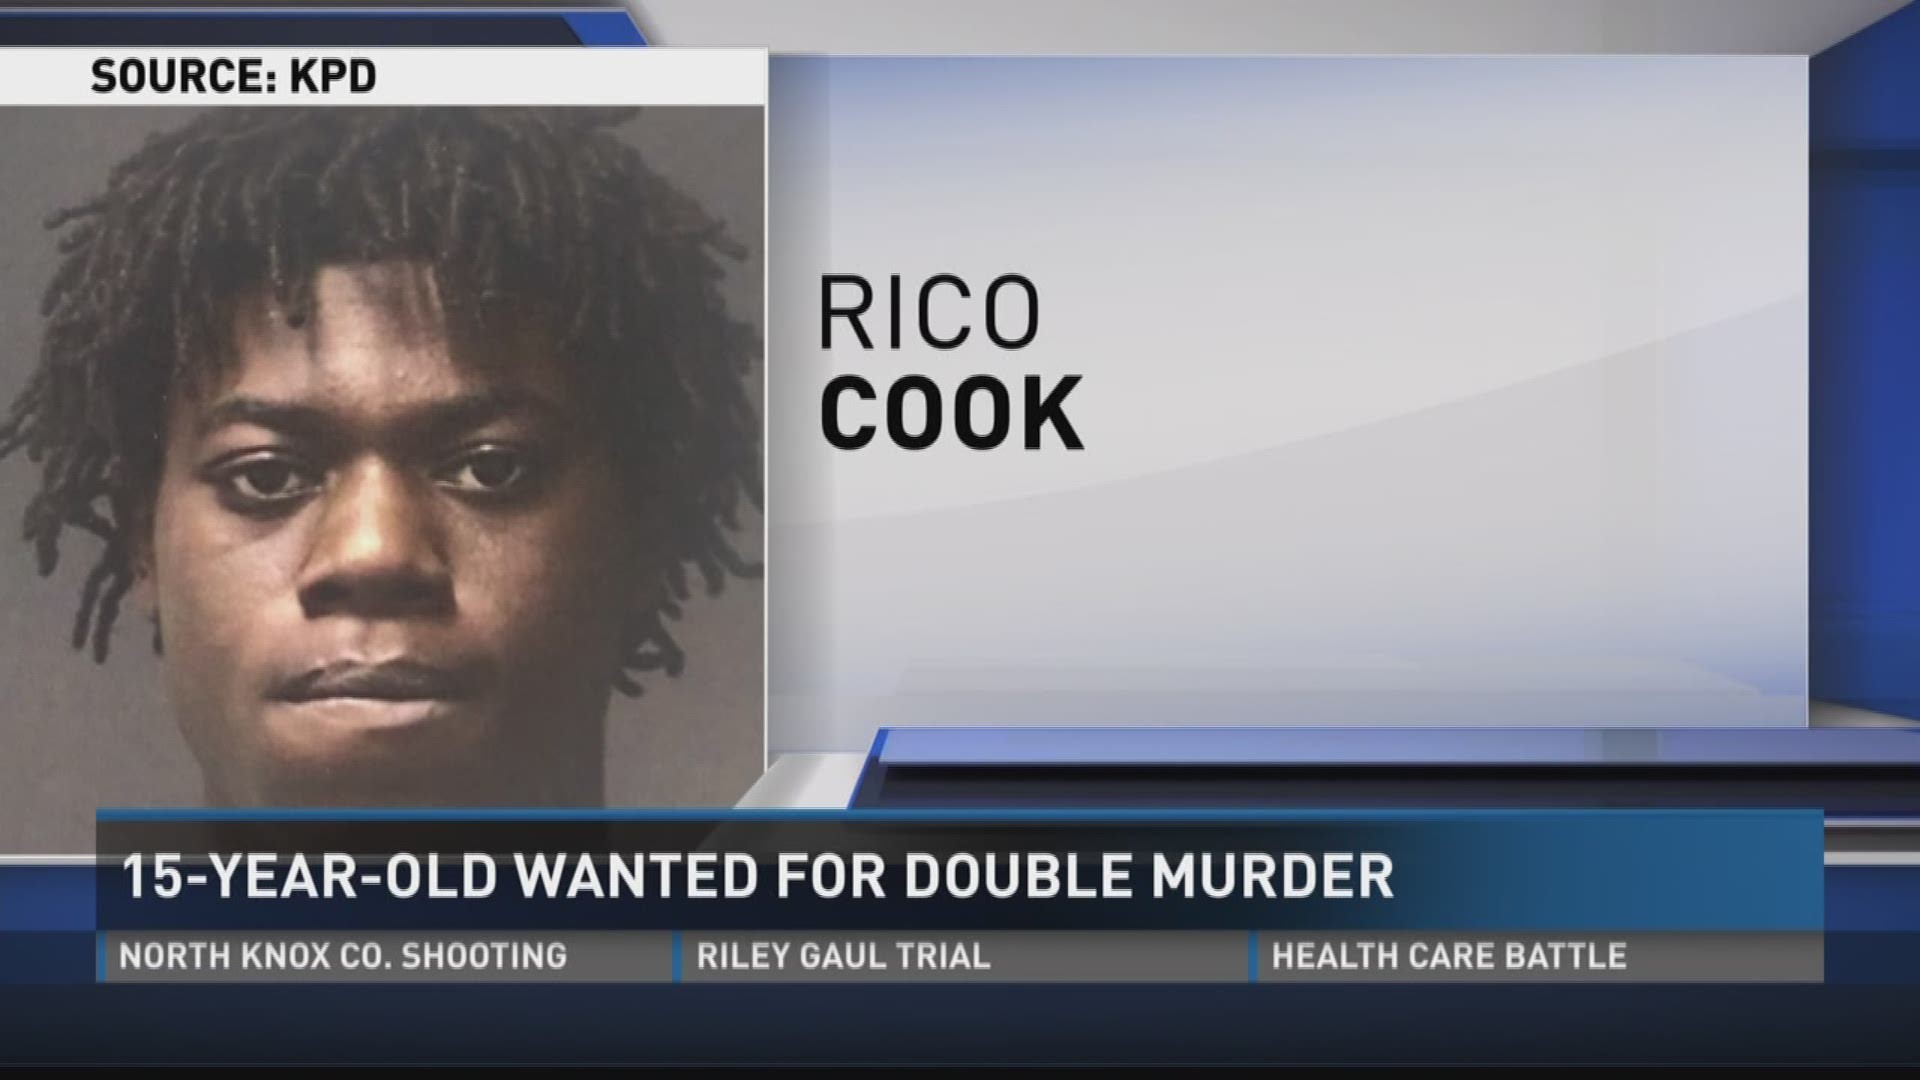 Rico Cook, 15, is considered armed and dangerous, according to KPD. He and another teen shot 3 people inside a car during a drug deal.